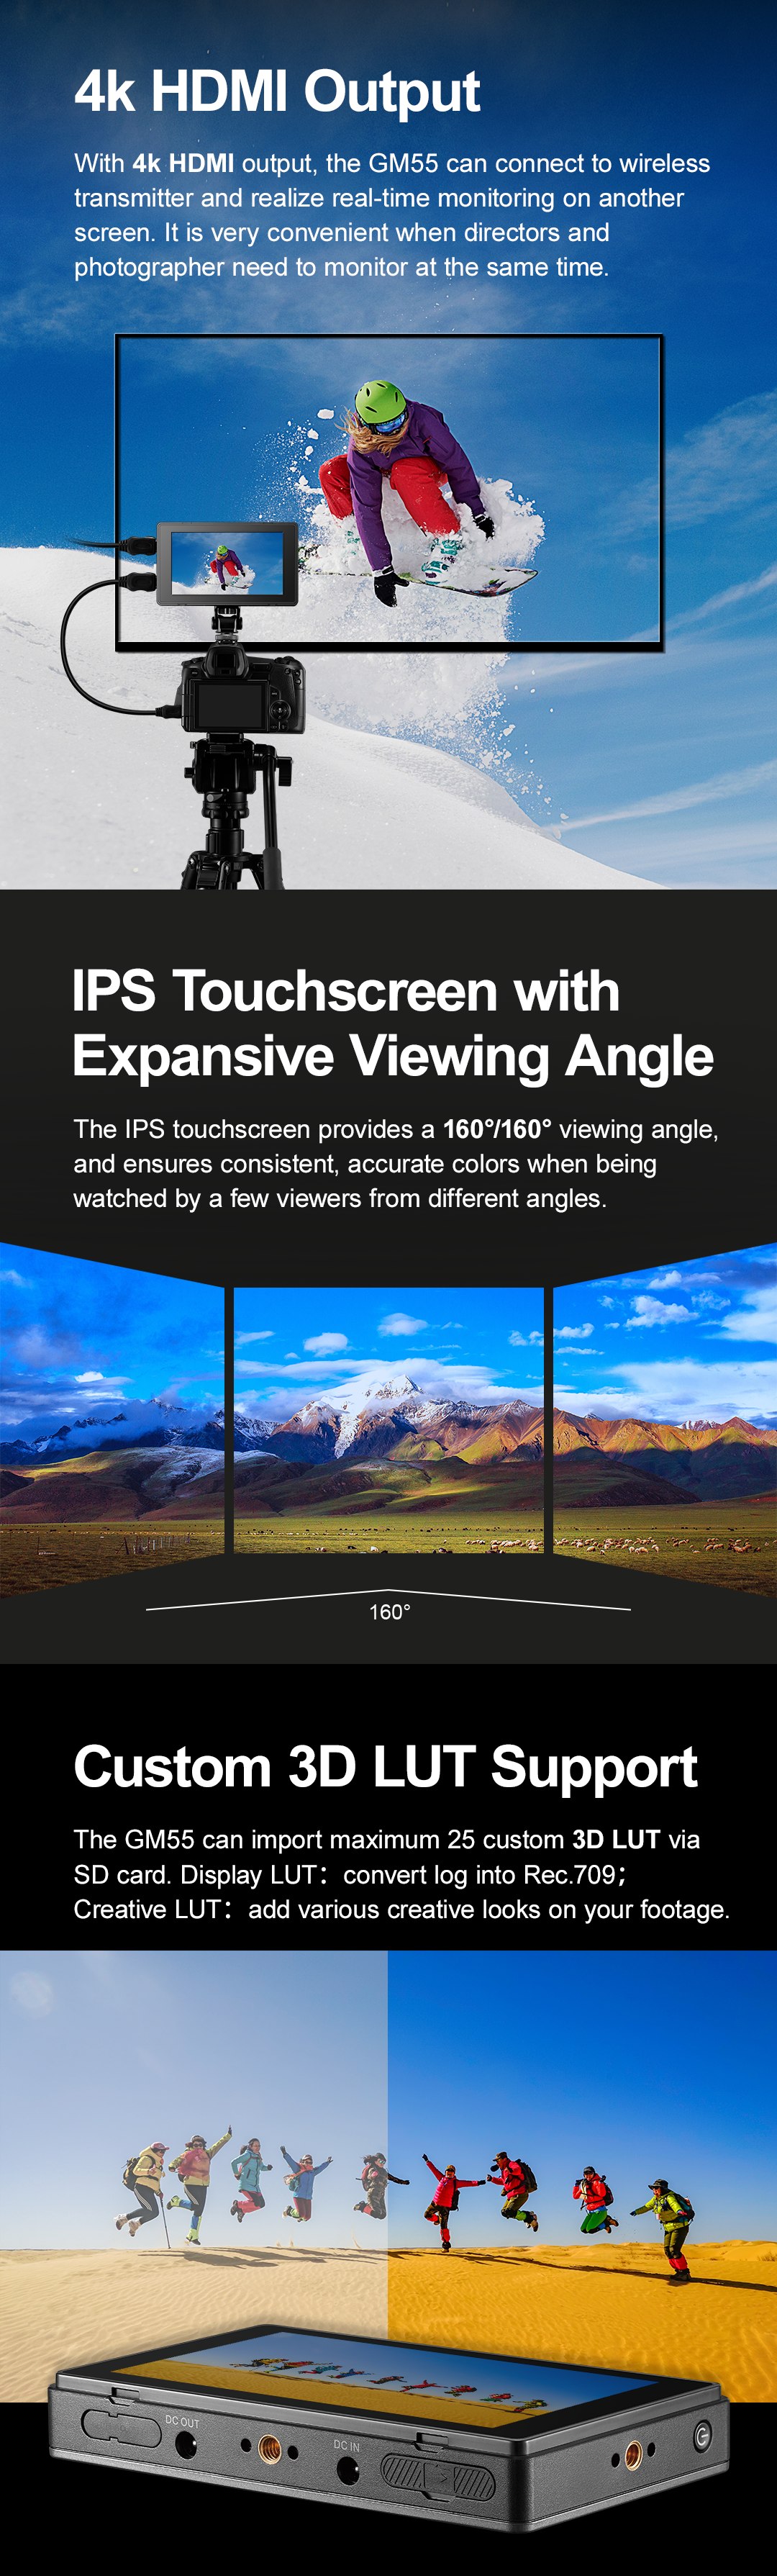 4K HDMI Output IPS Touchscreen with Expansive Viewing Angle Custom 3D LUT support